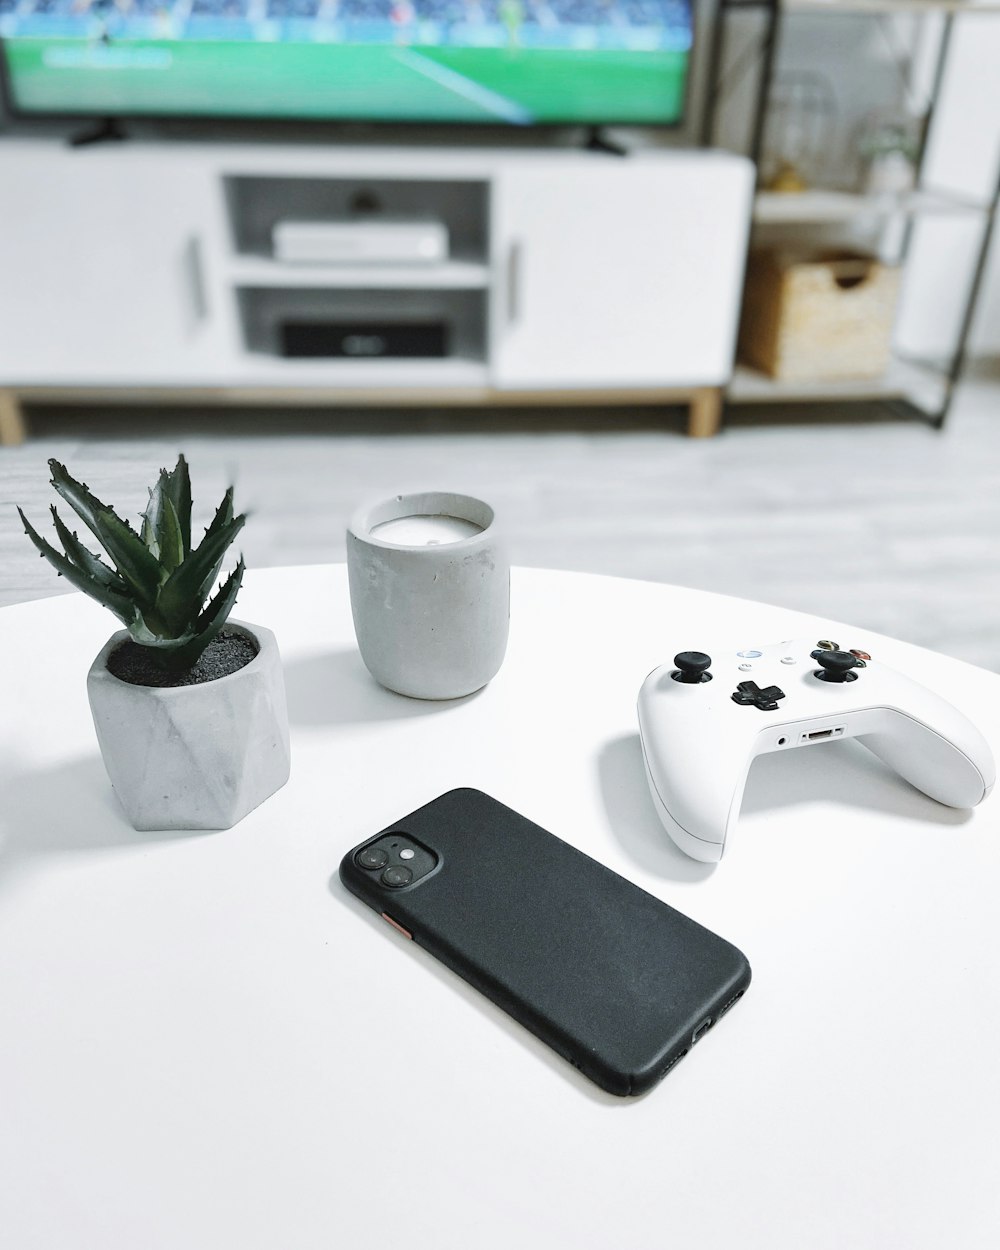 white xbox one controller beside green plant